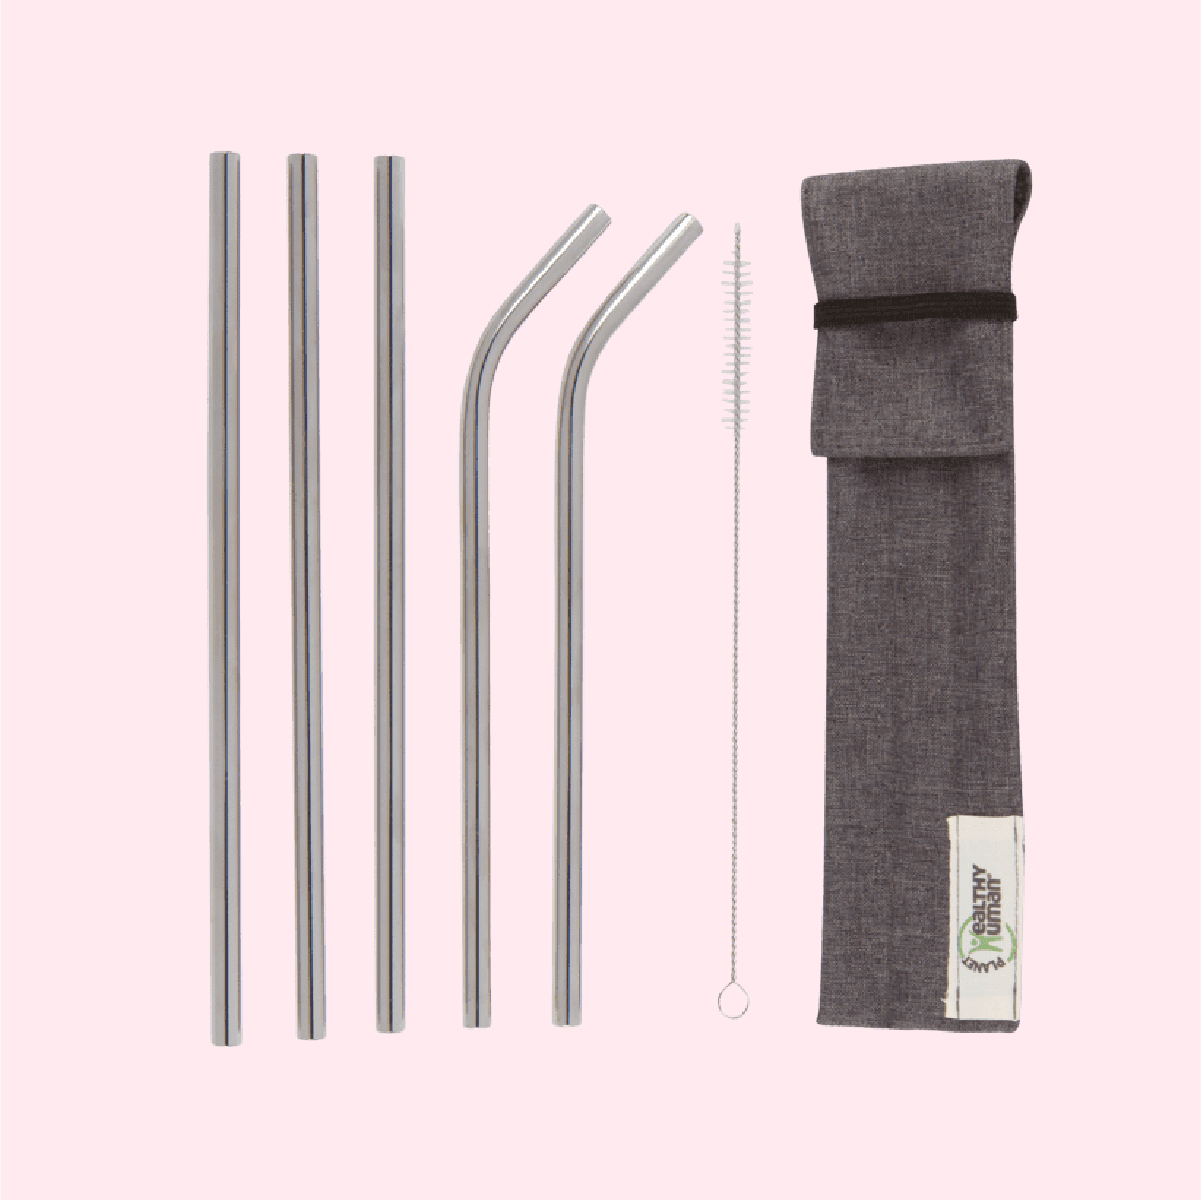 Flexible Stainless Steel Straws 26 inch Pack of 5 : extra long